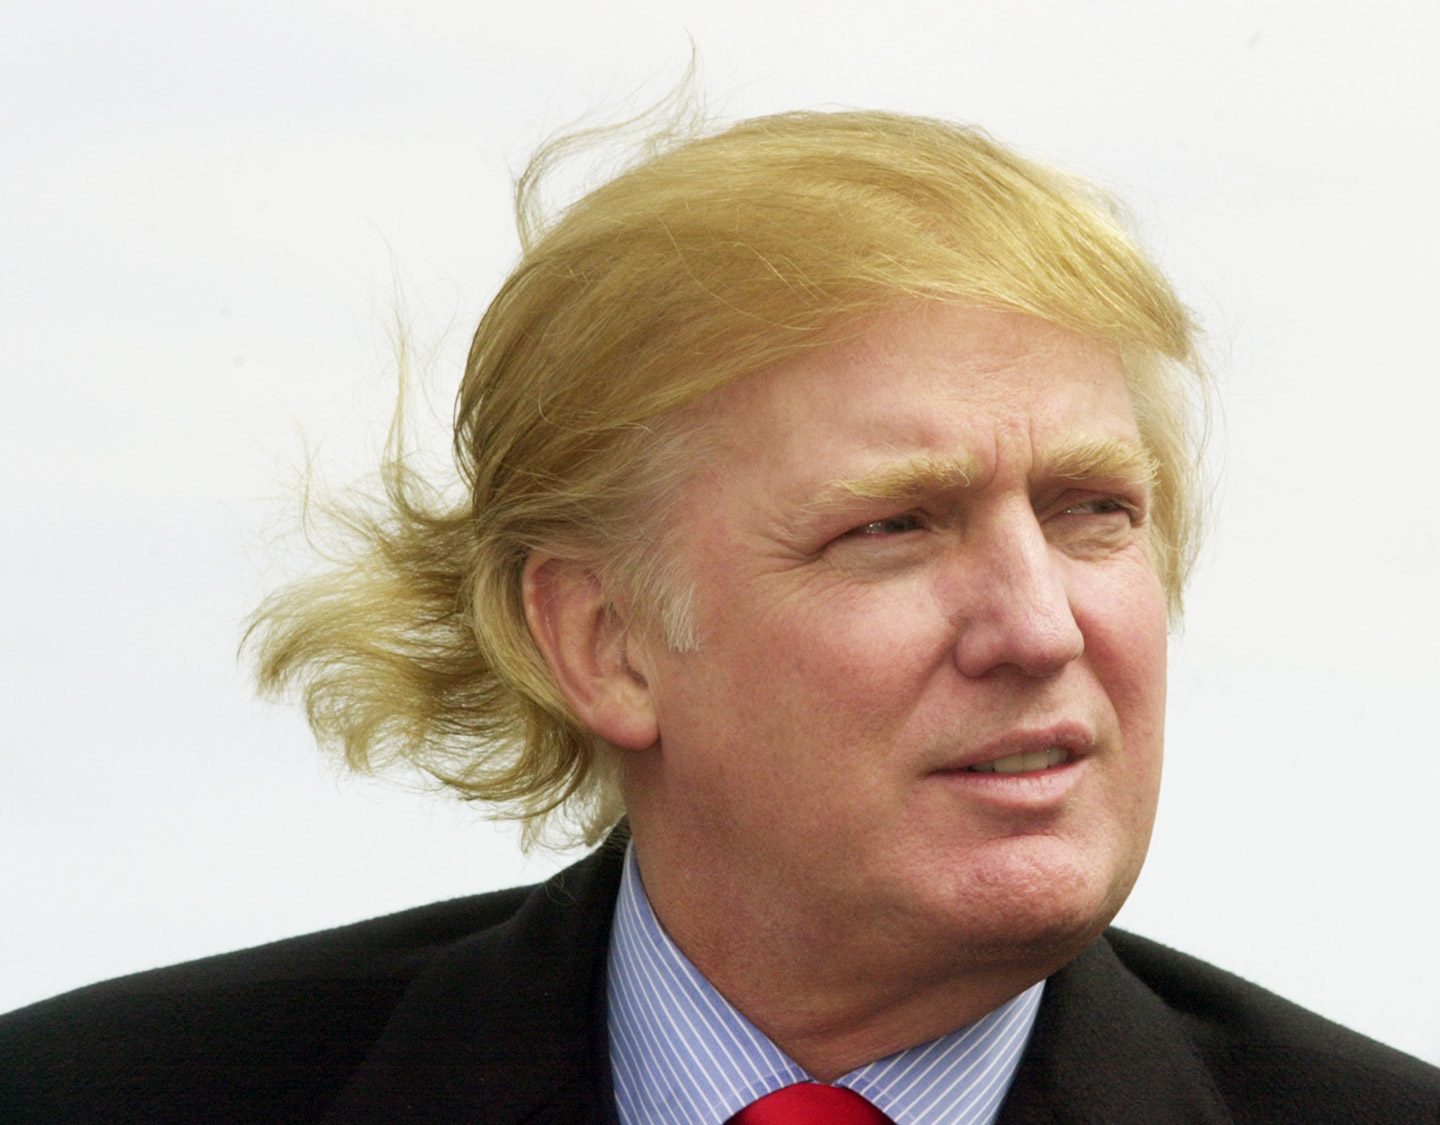 Understanding Trump: It's Not A Comb Over. It's A Mullet.